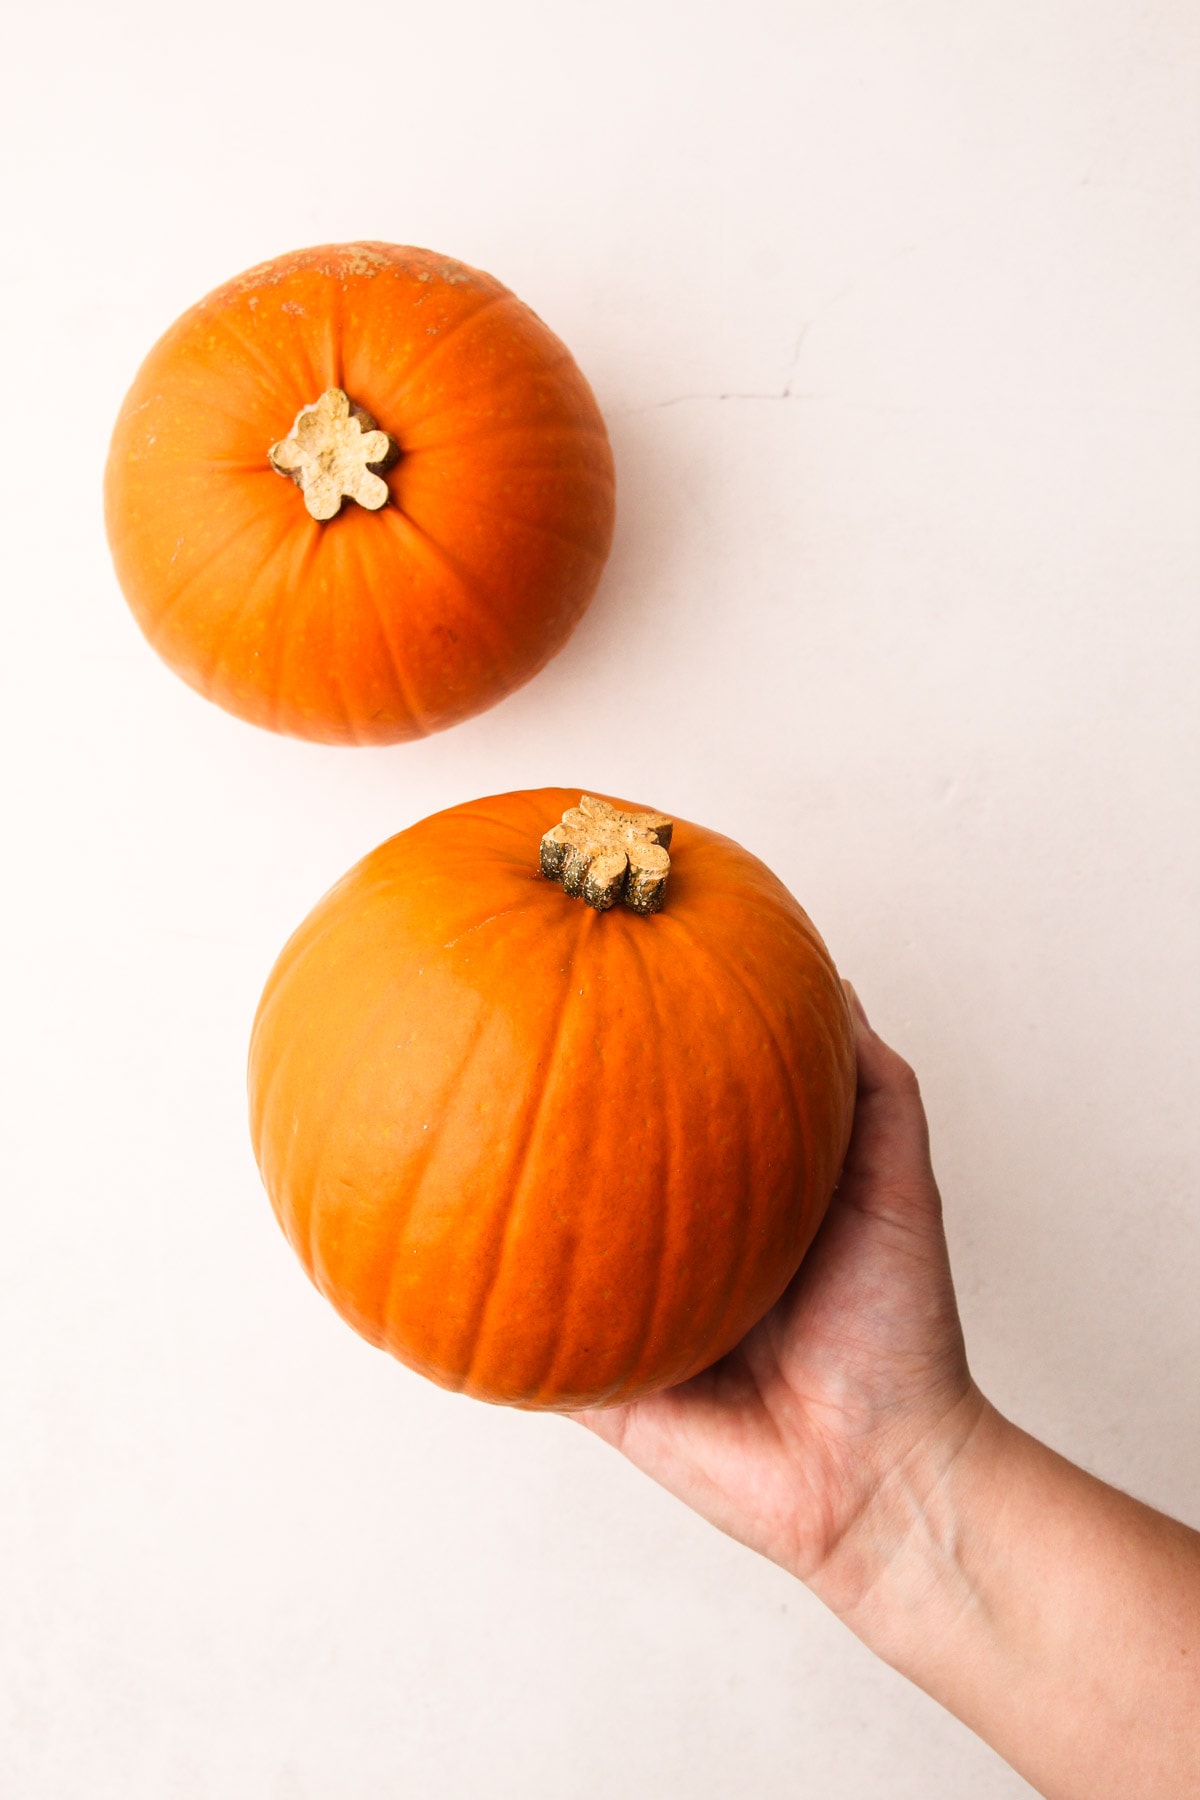 Two sugar pumpkins that are good for roasting.